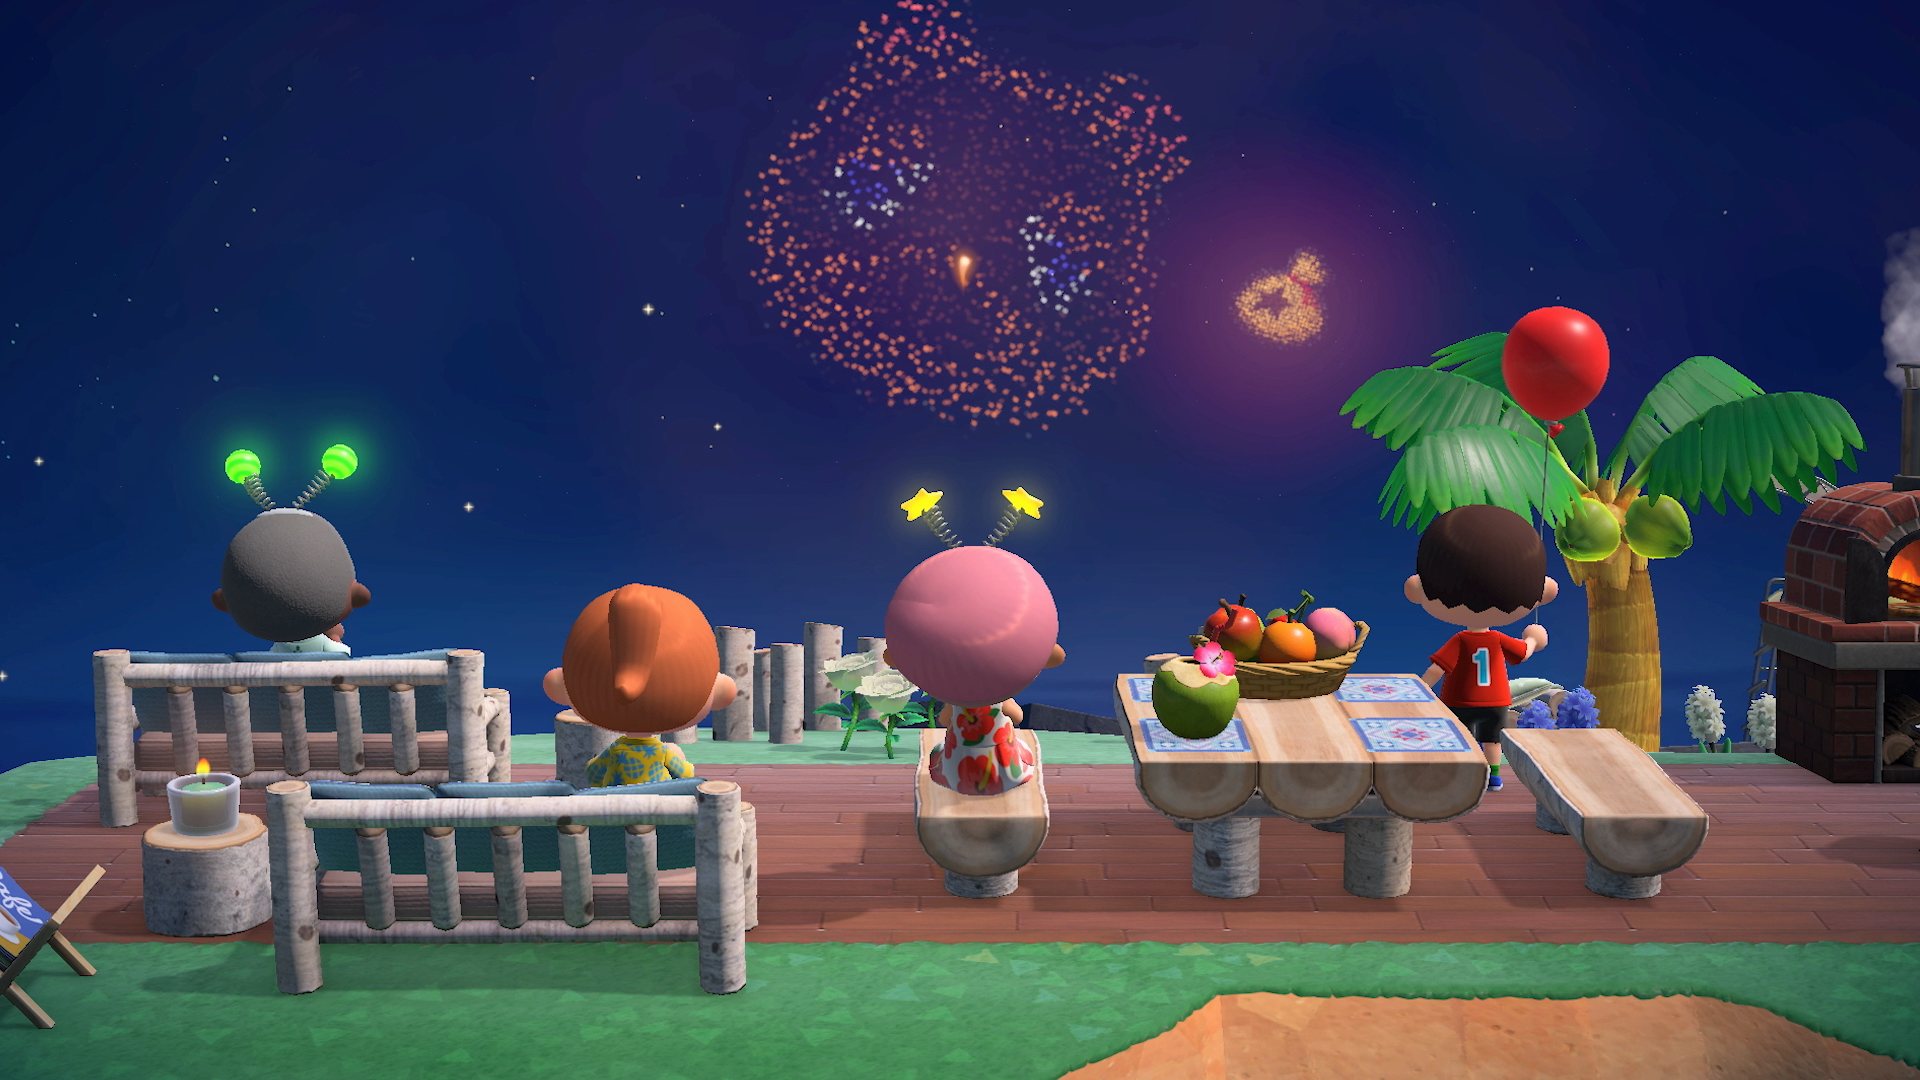 Fireworks Shows, Dreaming, and More Make Their Way to Animal Crossing: New Horizons